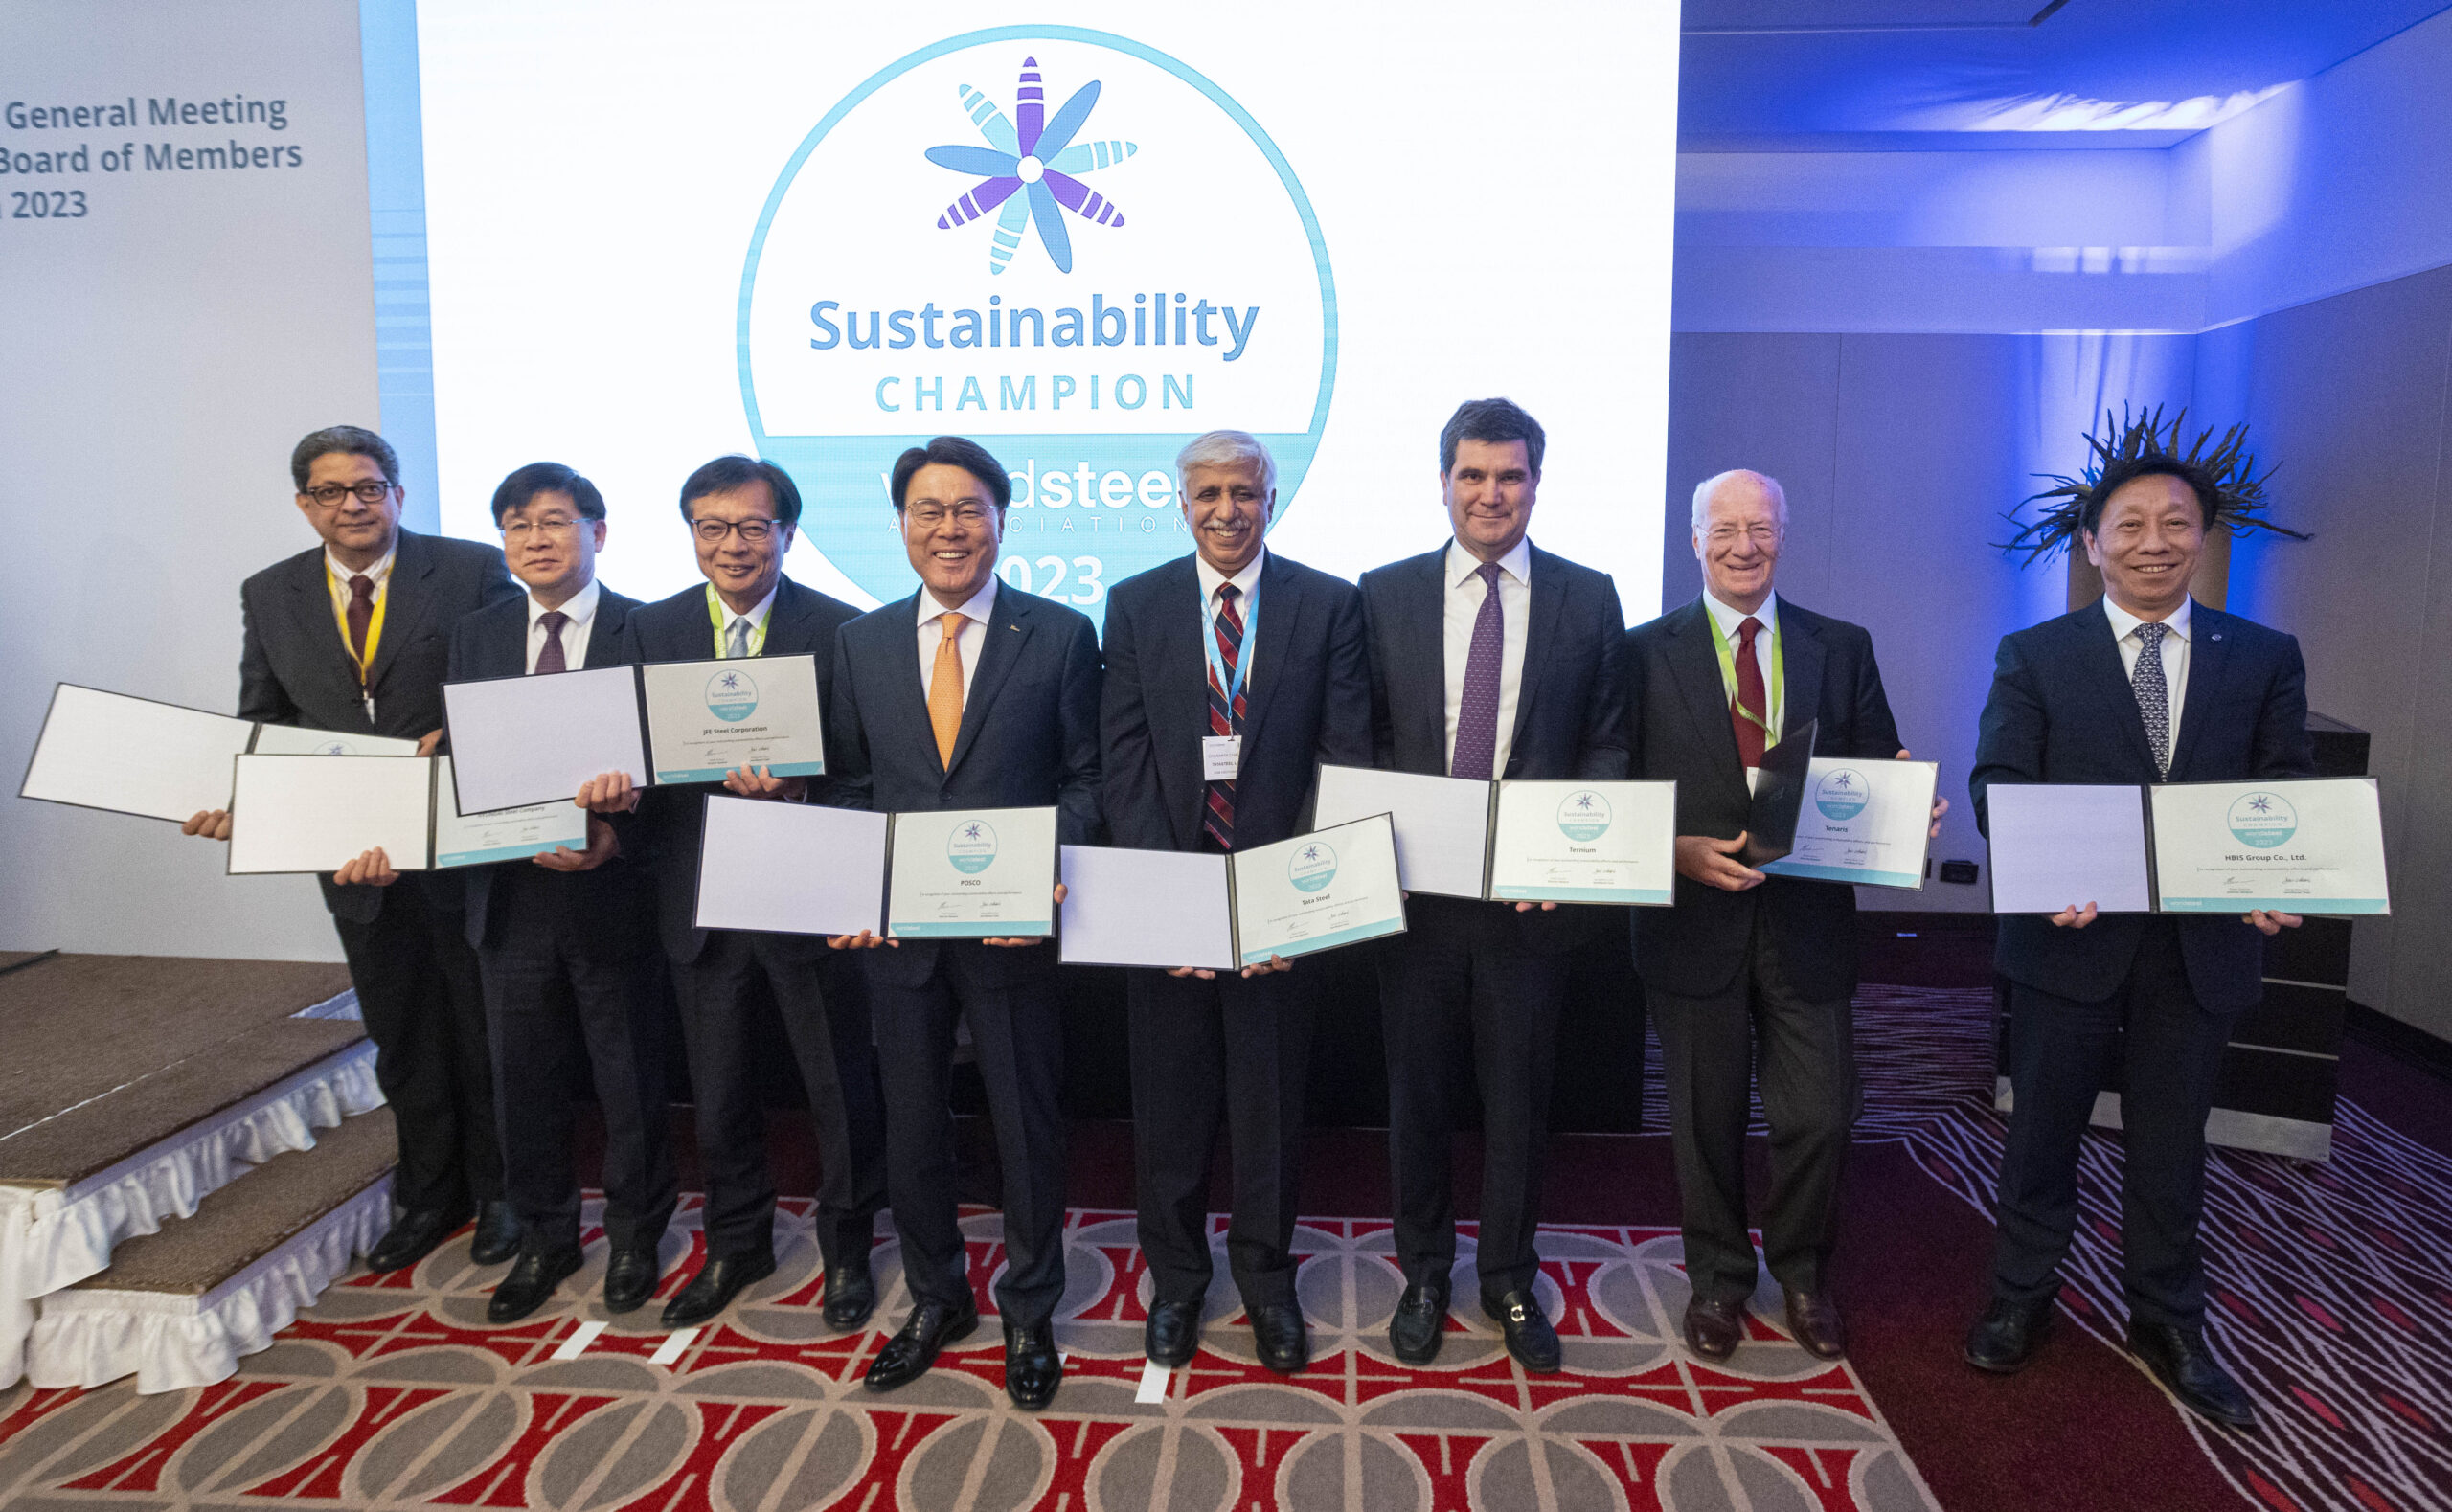 worldsteel announces the 2023 Steel Sustainability Champions